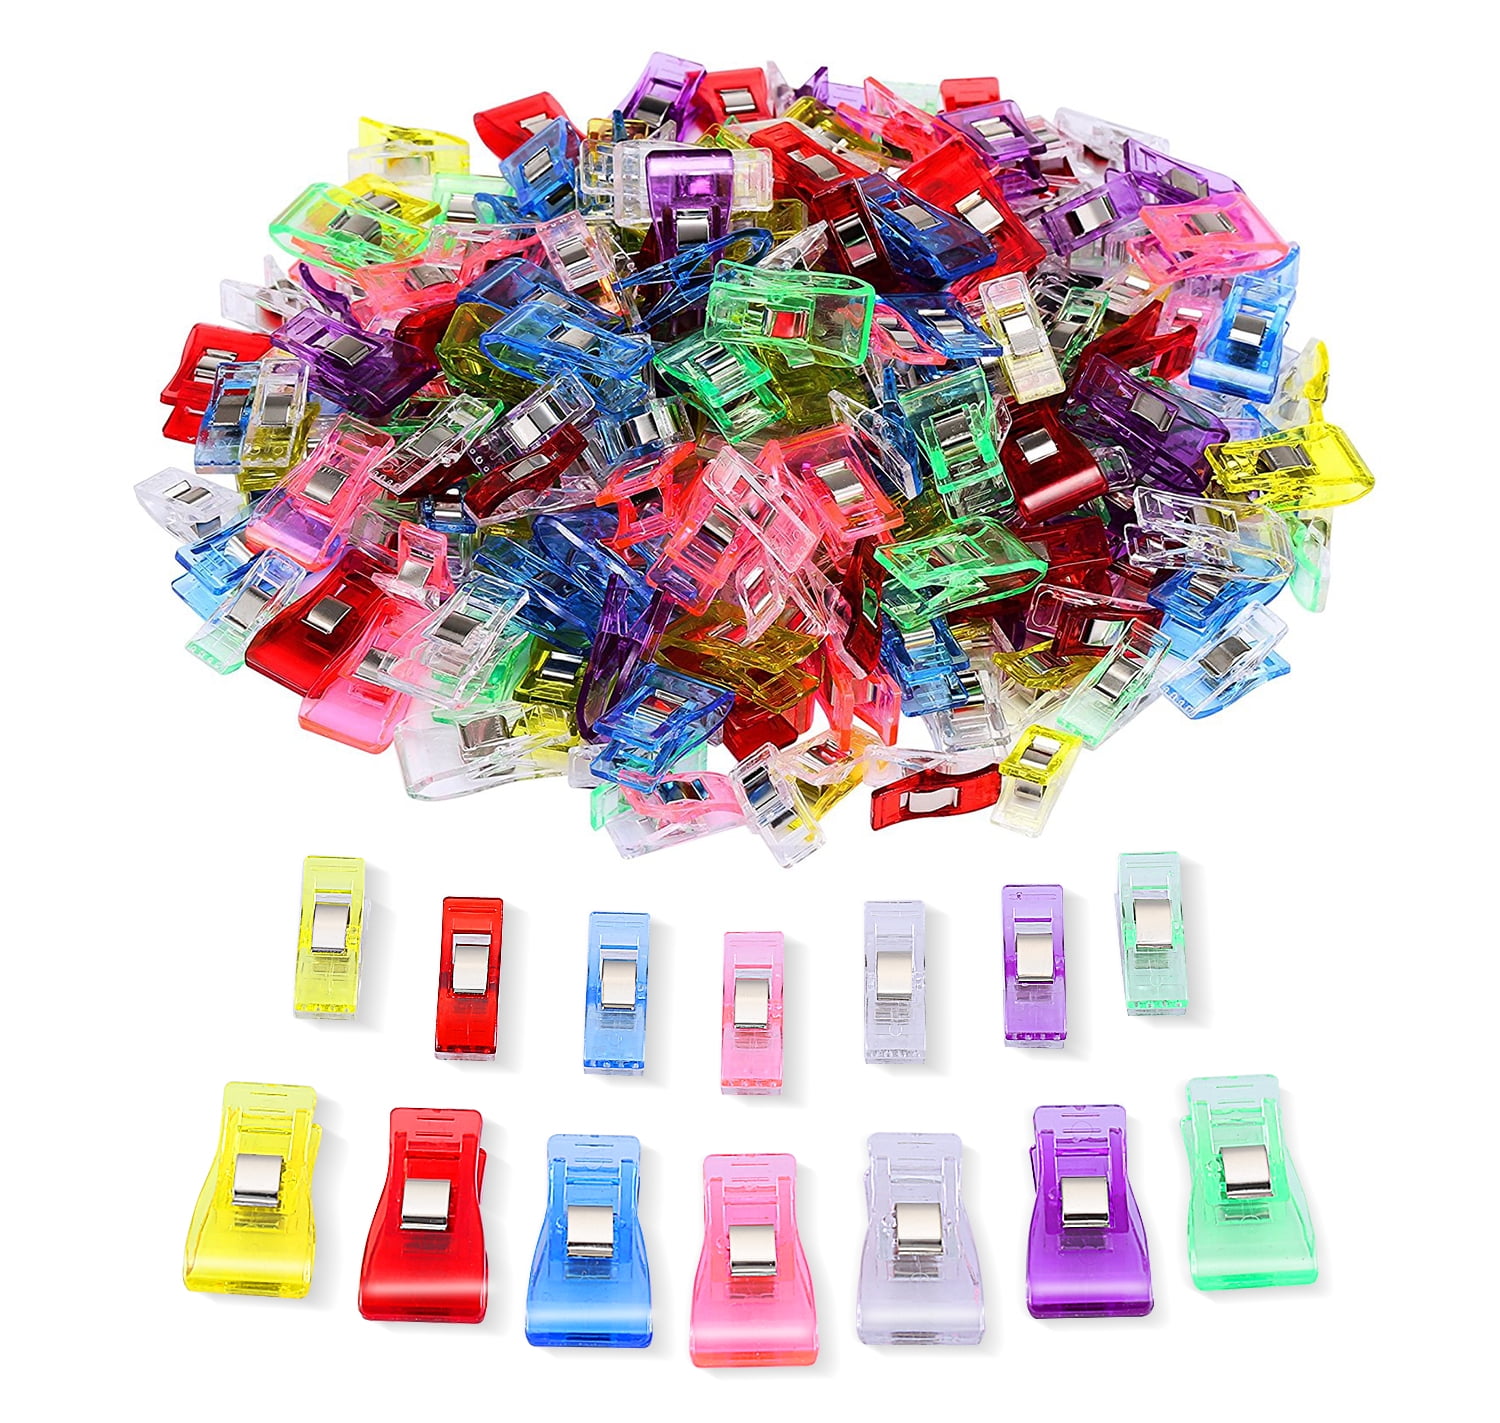 100 Pack Multipurpose Sewing Clips Assorted Colors,Quilting Clips for Sewing Quilting Binding Crafts Fabric Paper and Hanging Little Things 